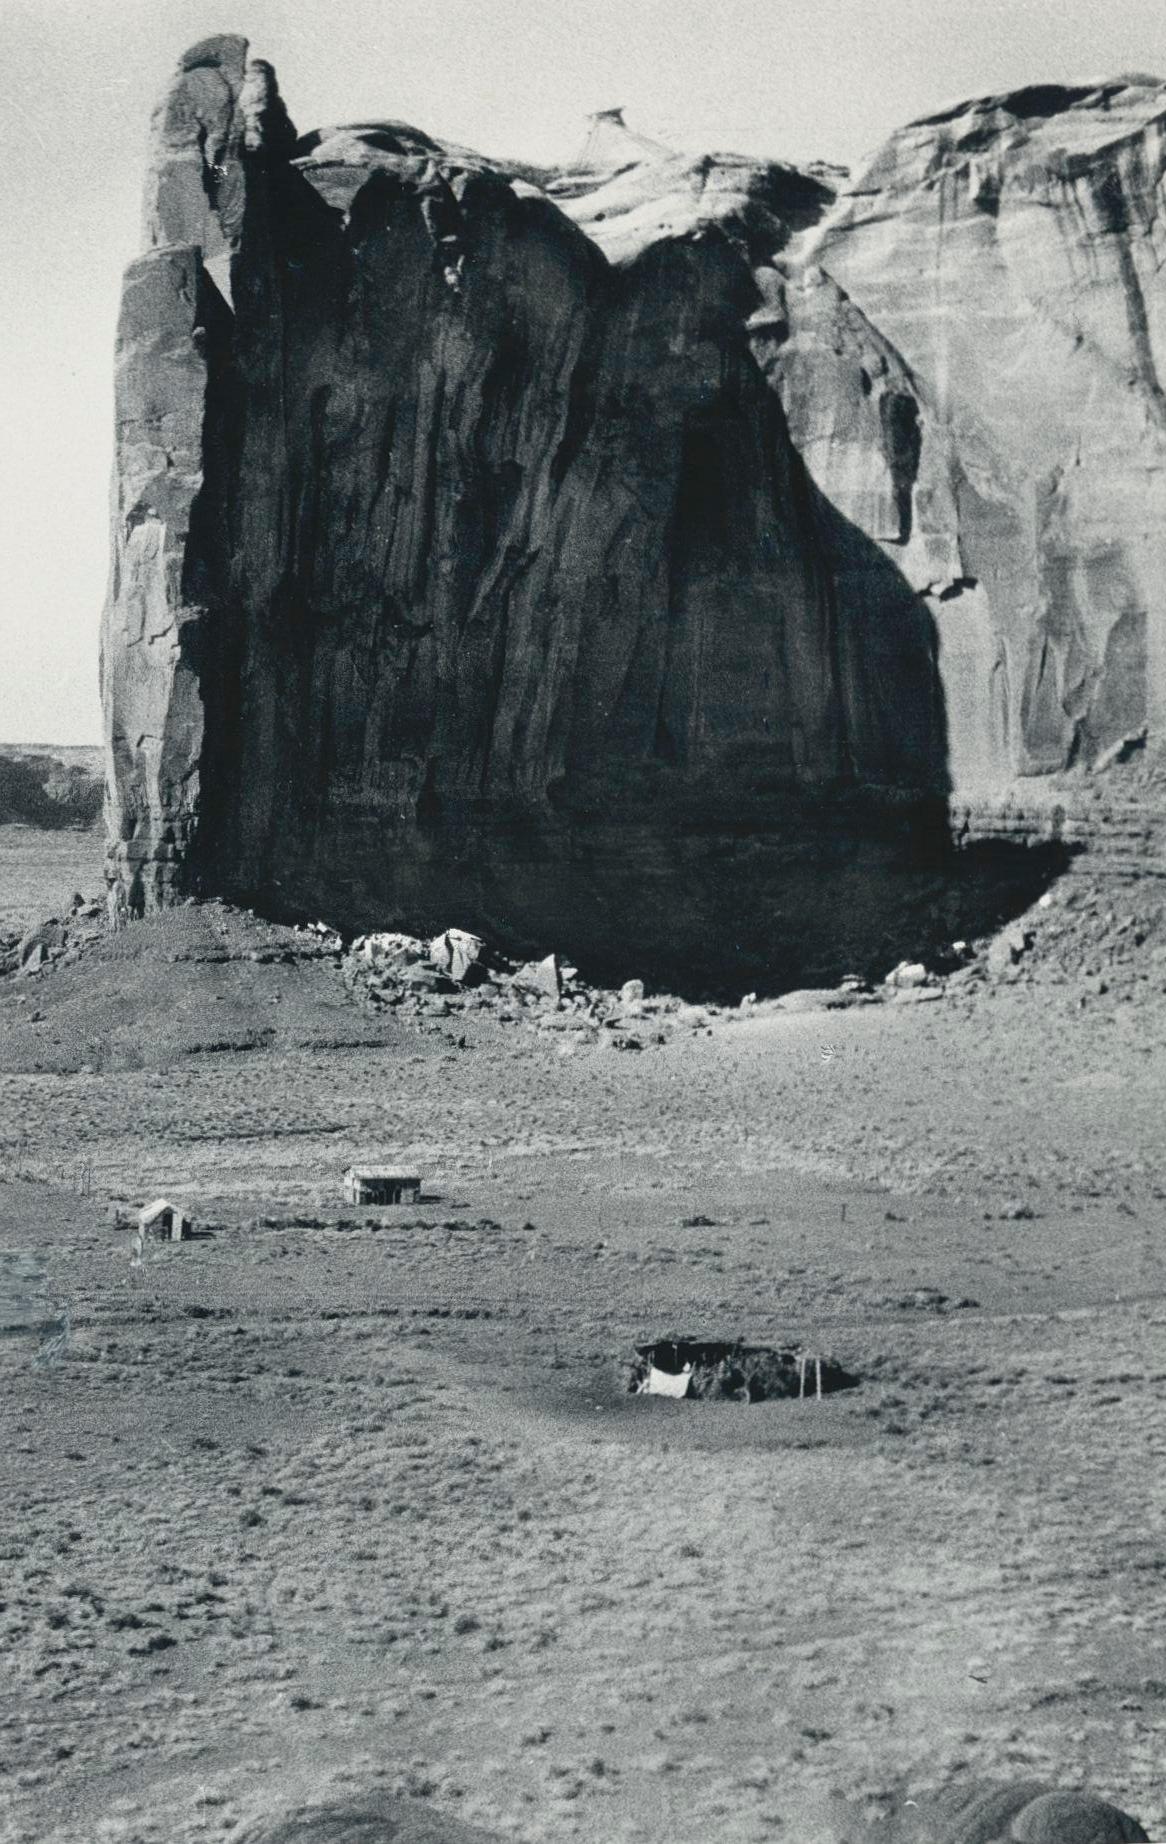 Monument Valley, Utah/Arizona, Black and White, USA 1960s, 17, 1 x 23, 1 cm - Photograph by Erich Andres